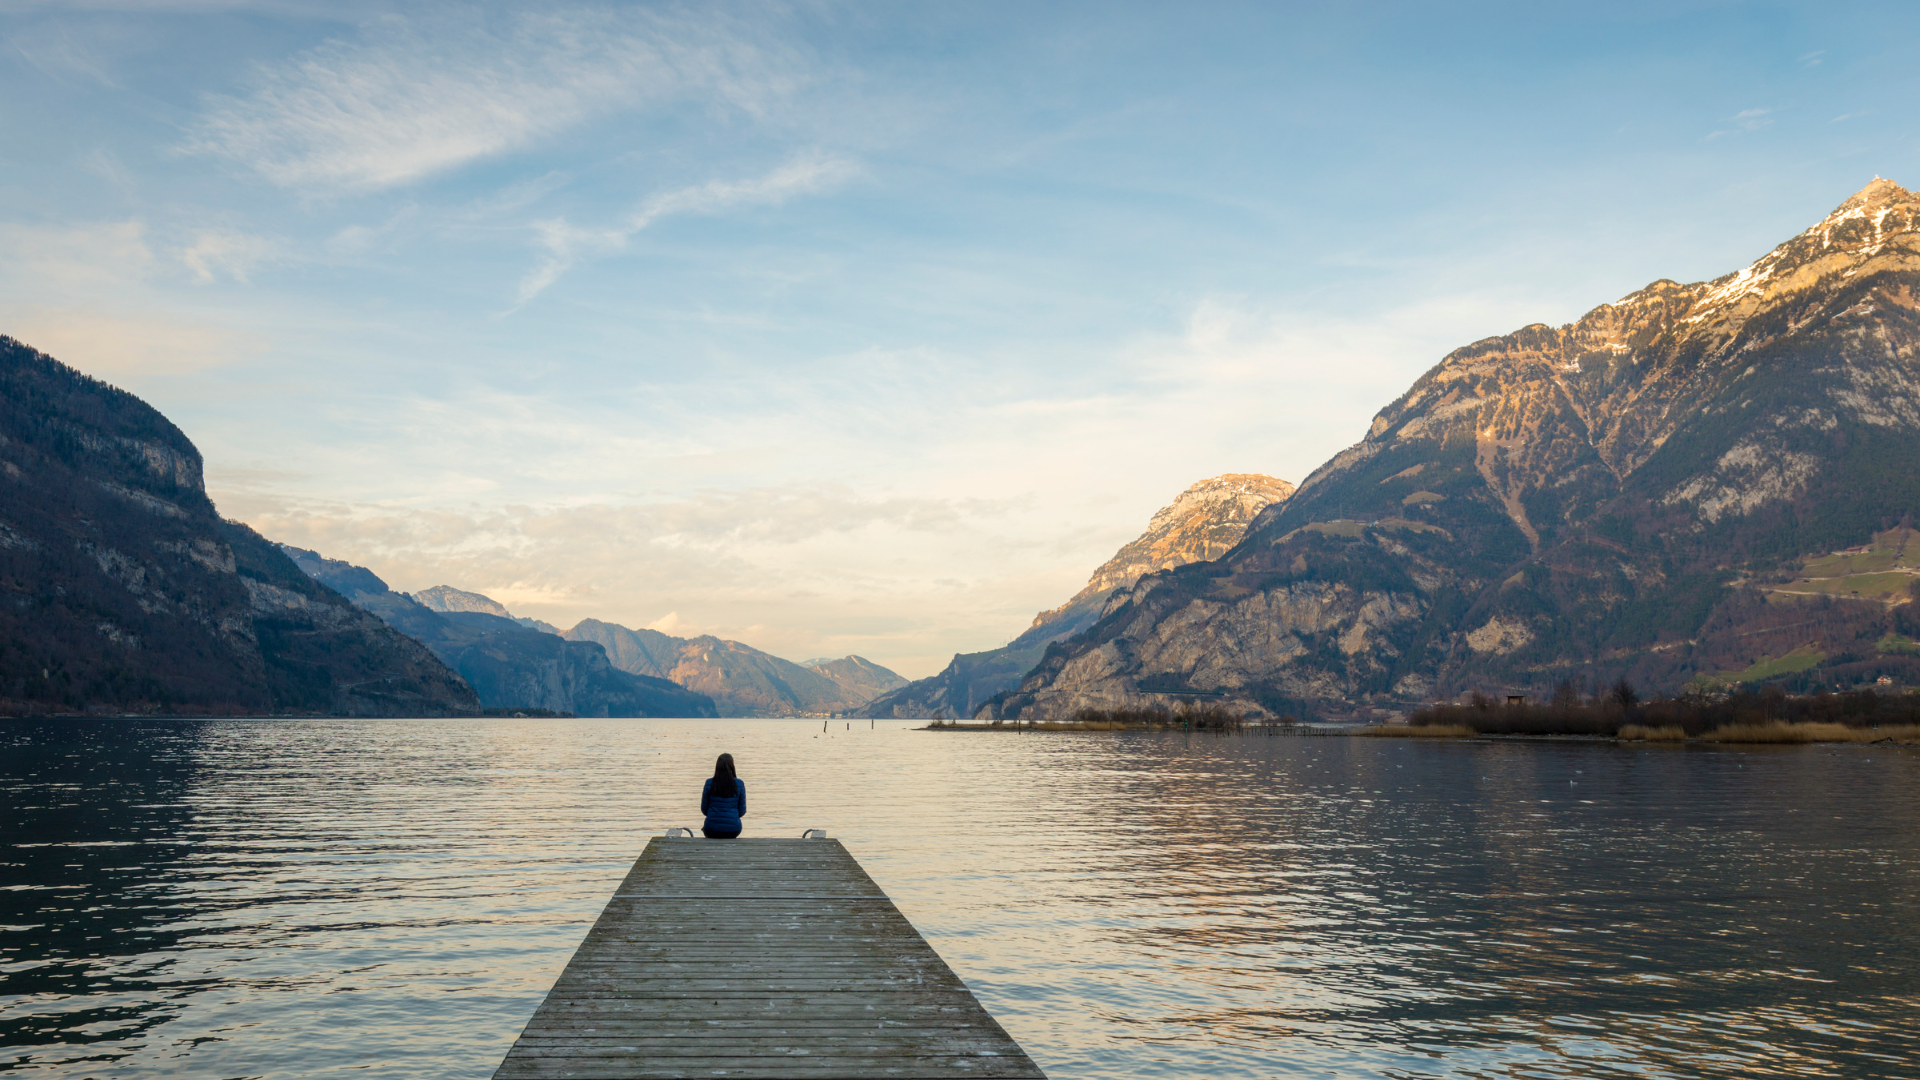 A woman sitting at the end of a pier viewing a lake and mountains at sunset.